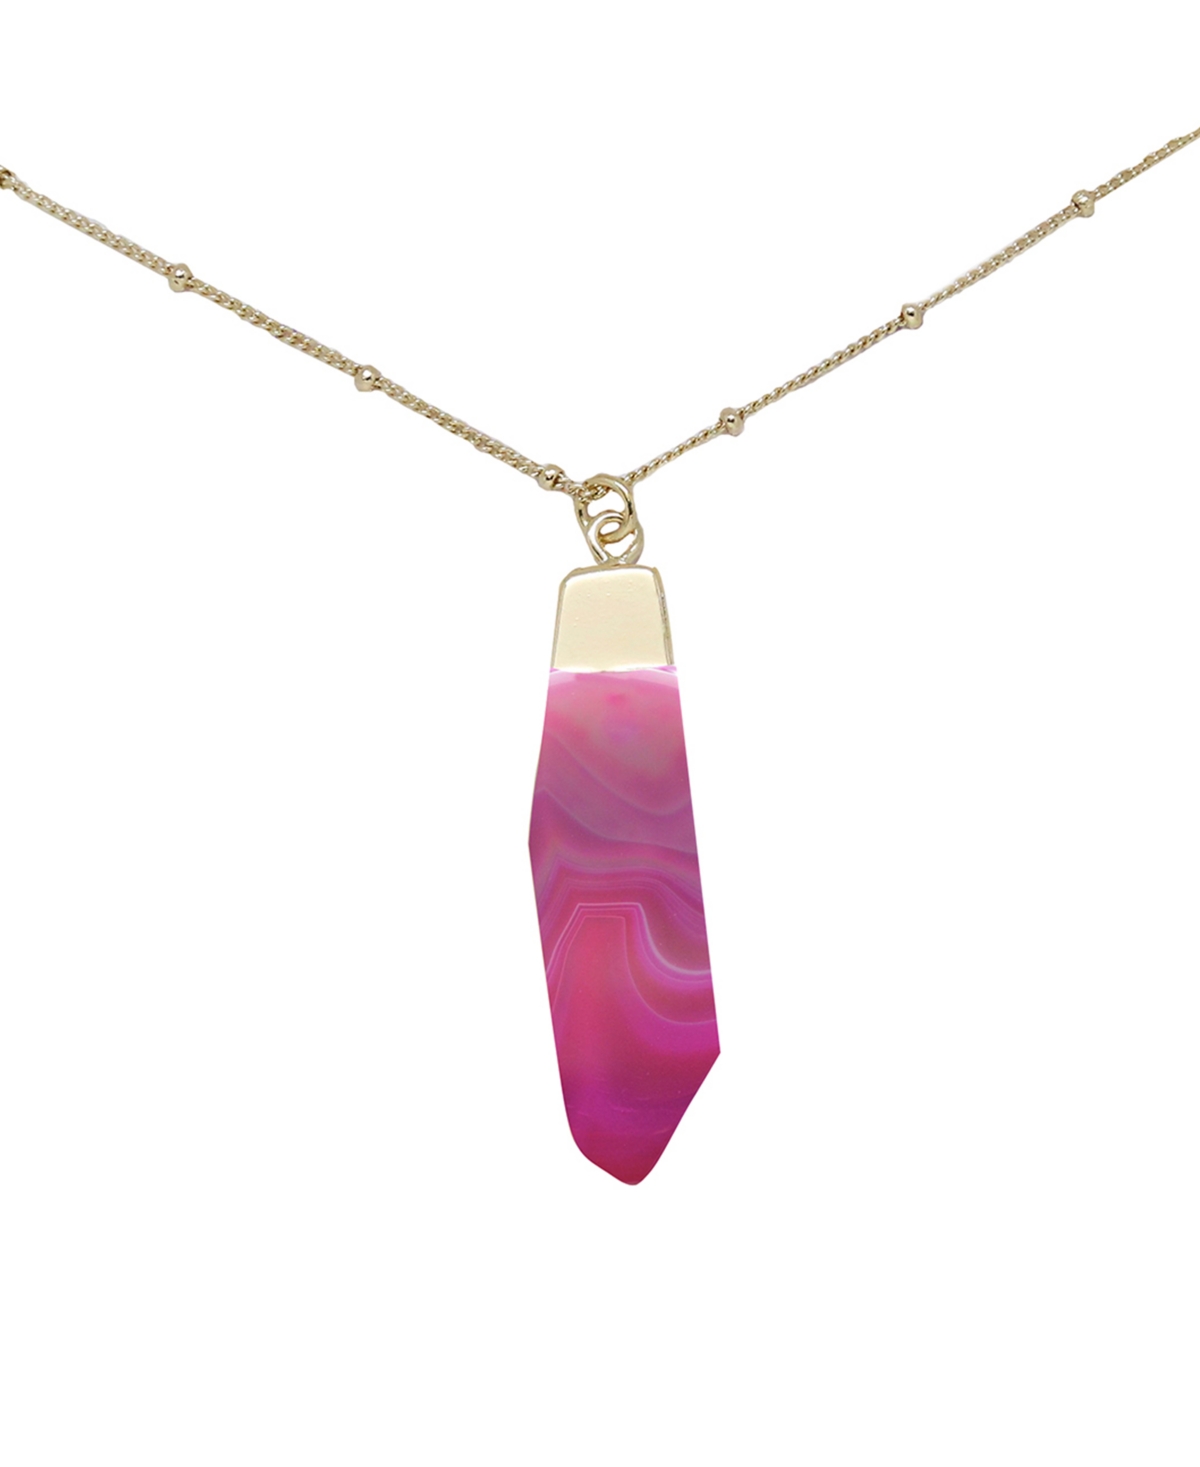 Charged Stone Pendant Necklace In Pink Agate